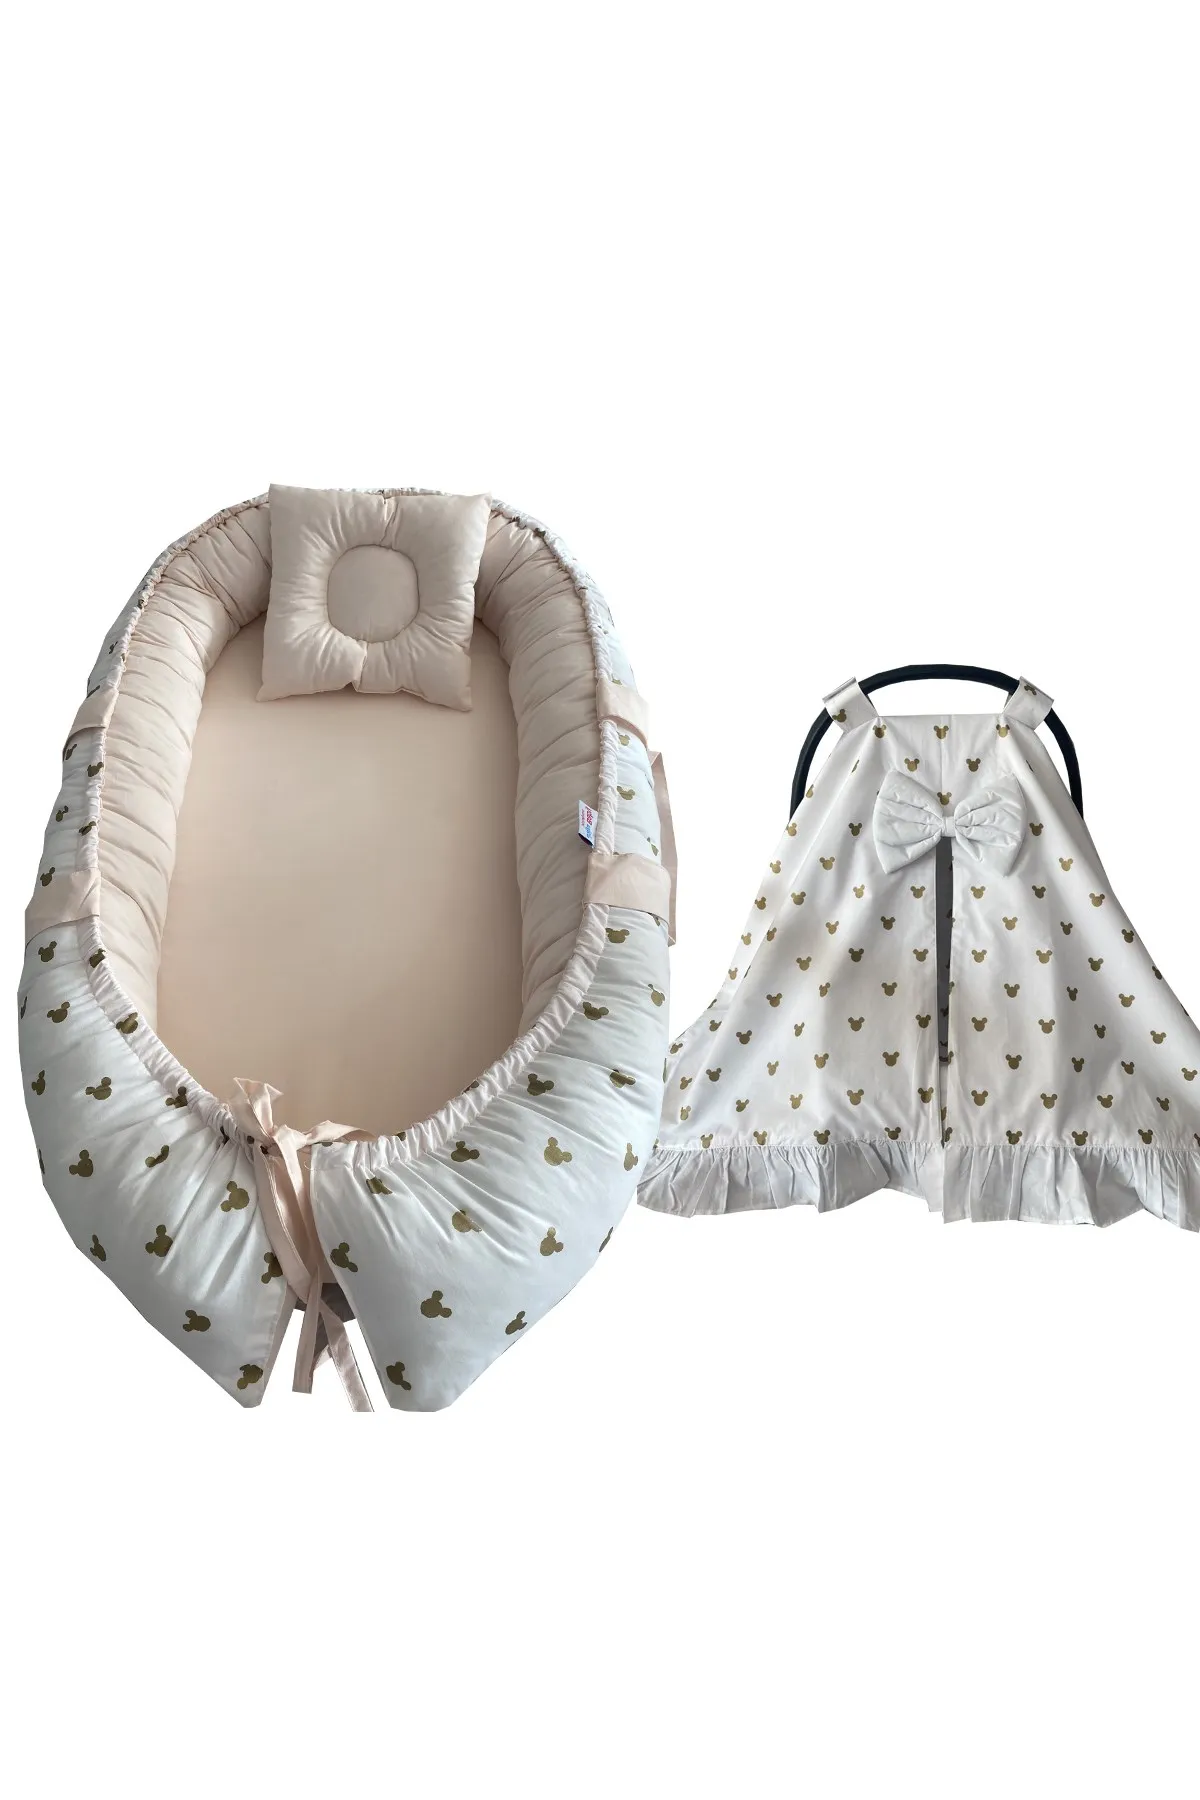 Jaju Baby Handmade Gold and Salmon Fabric Luxy Orthopedic Babynest and Stroller Cover 4 Pieces Set Mother Side Portable Baby Bed